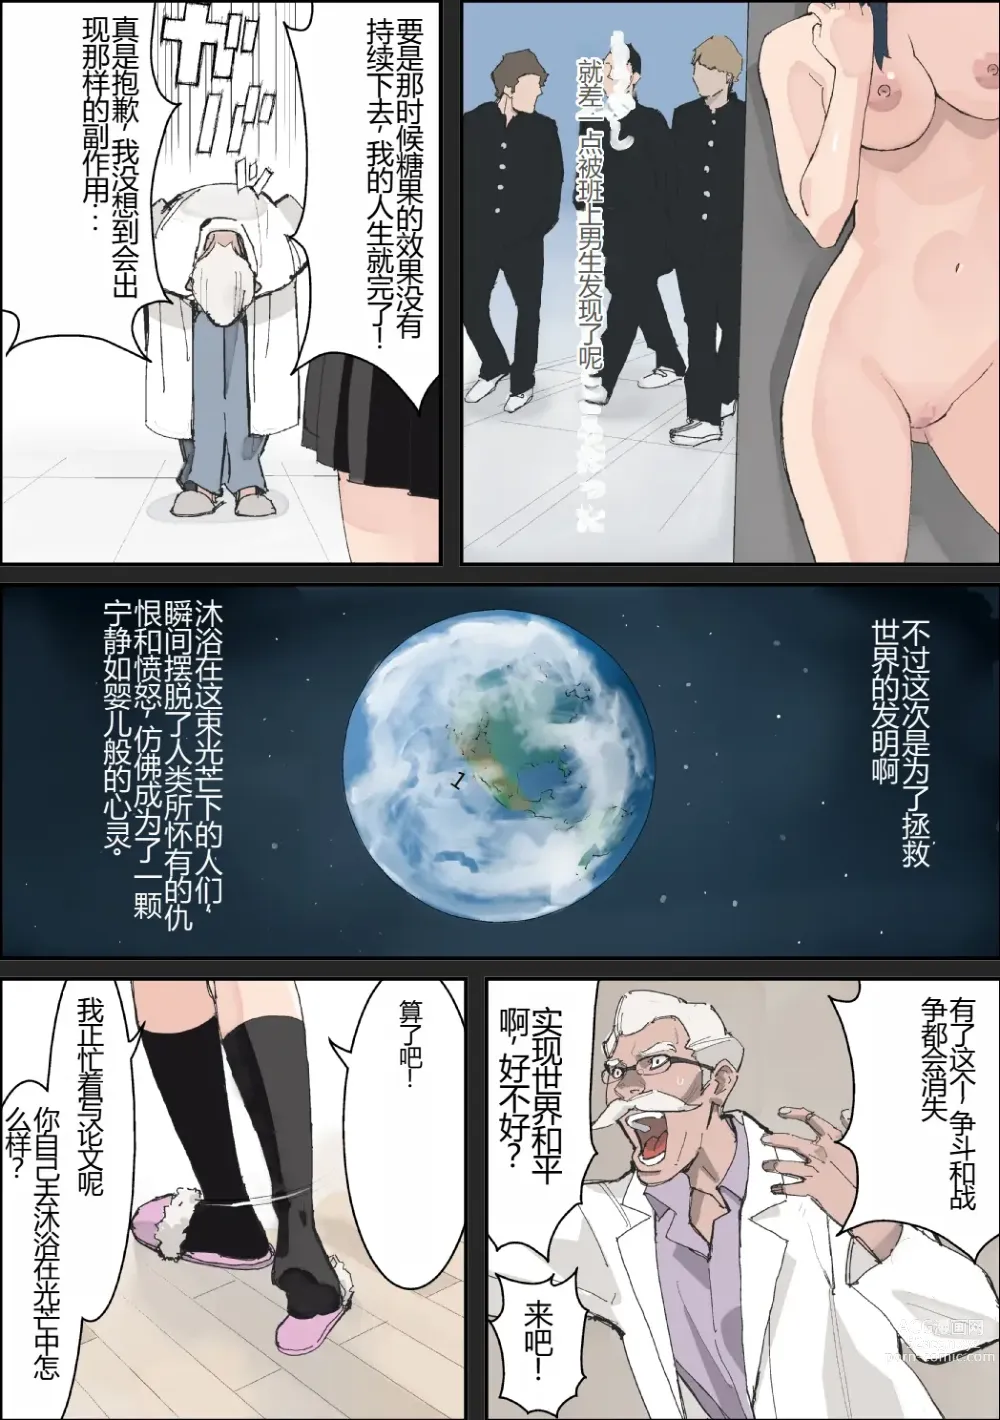 Page 5 of doujinshi 拯救世界的母狗